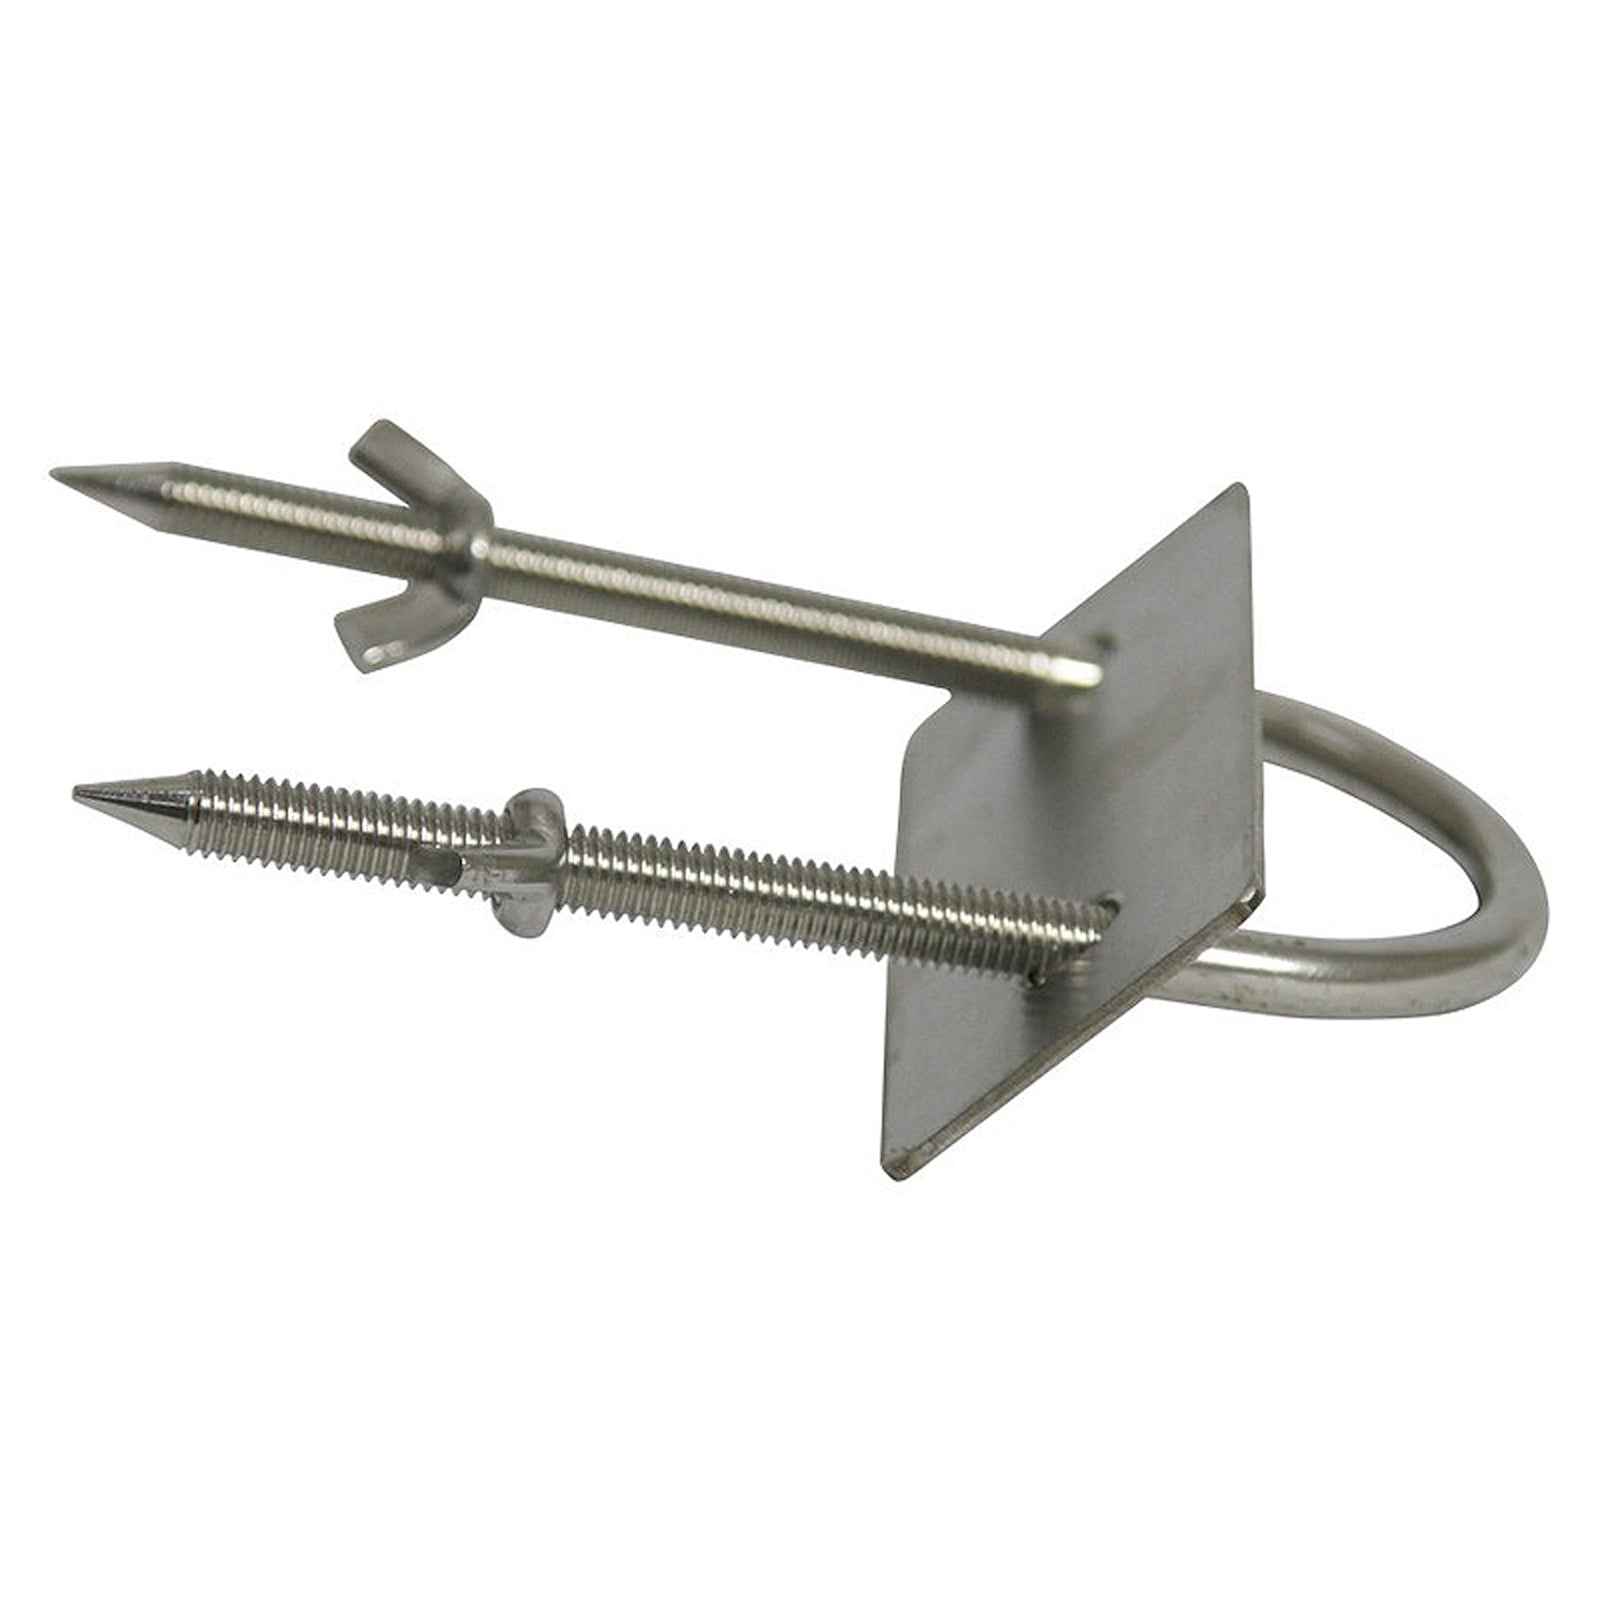 Stainless Steel Back Brace U Bolt with Wing Nut & Plate for BBQ Spit Rotisseries x 2 *Special Deal* from DIZZY LAMB